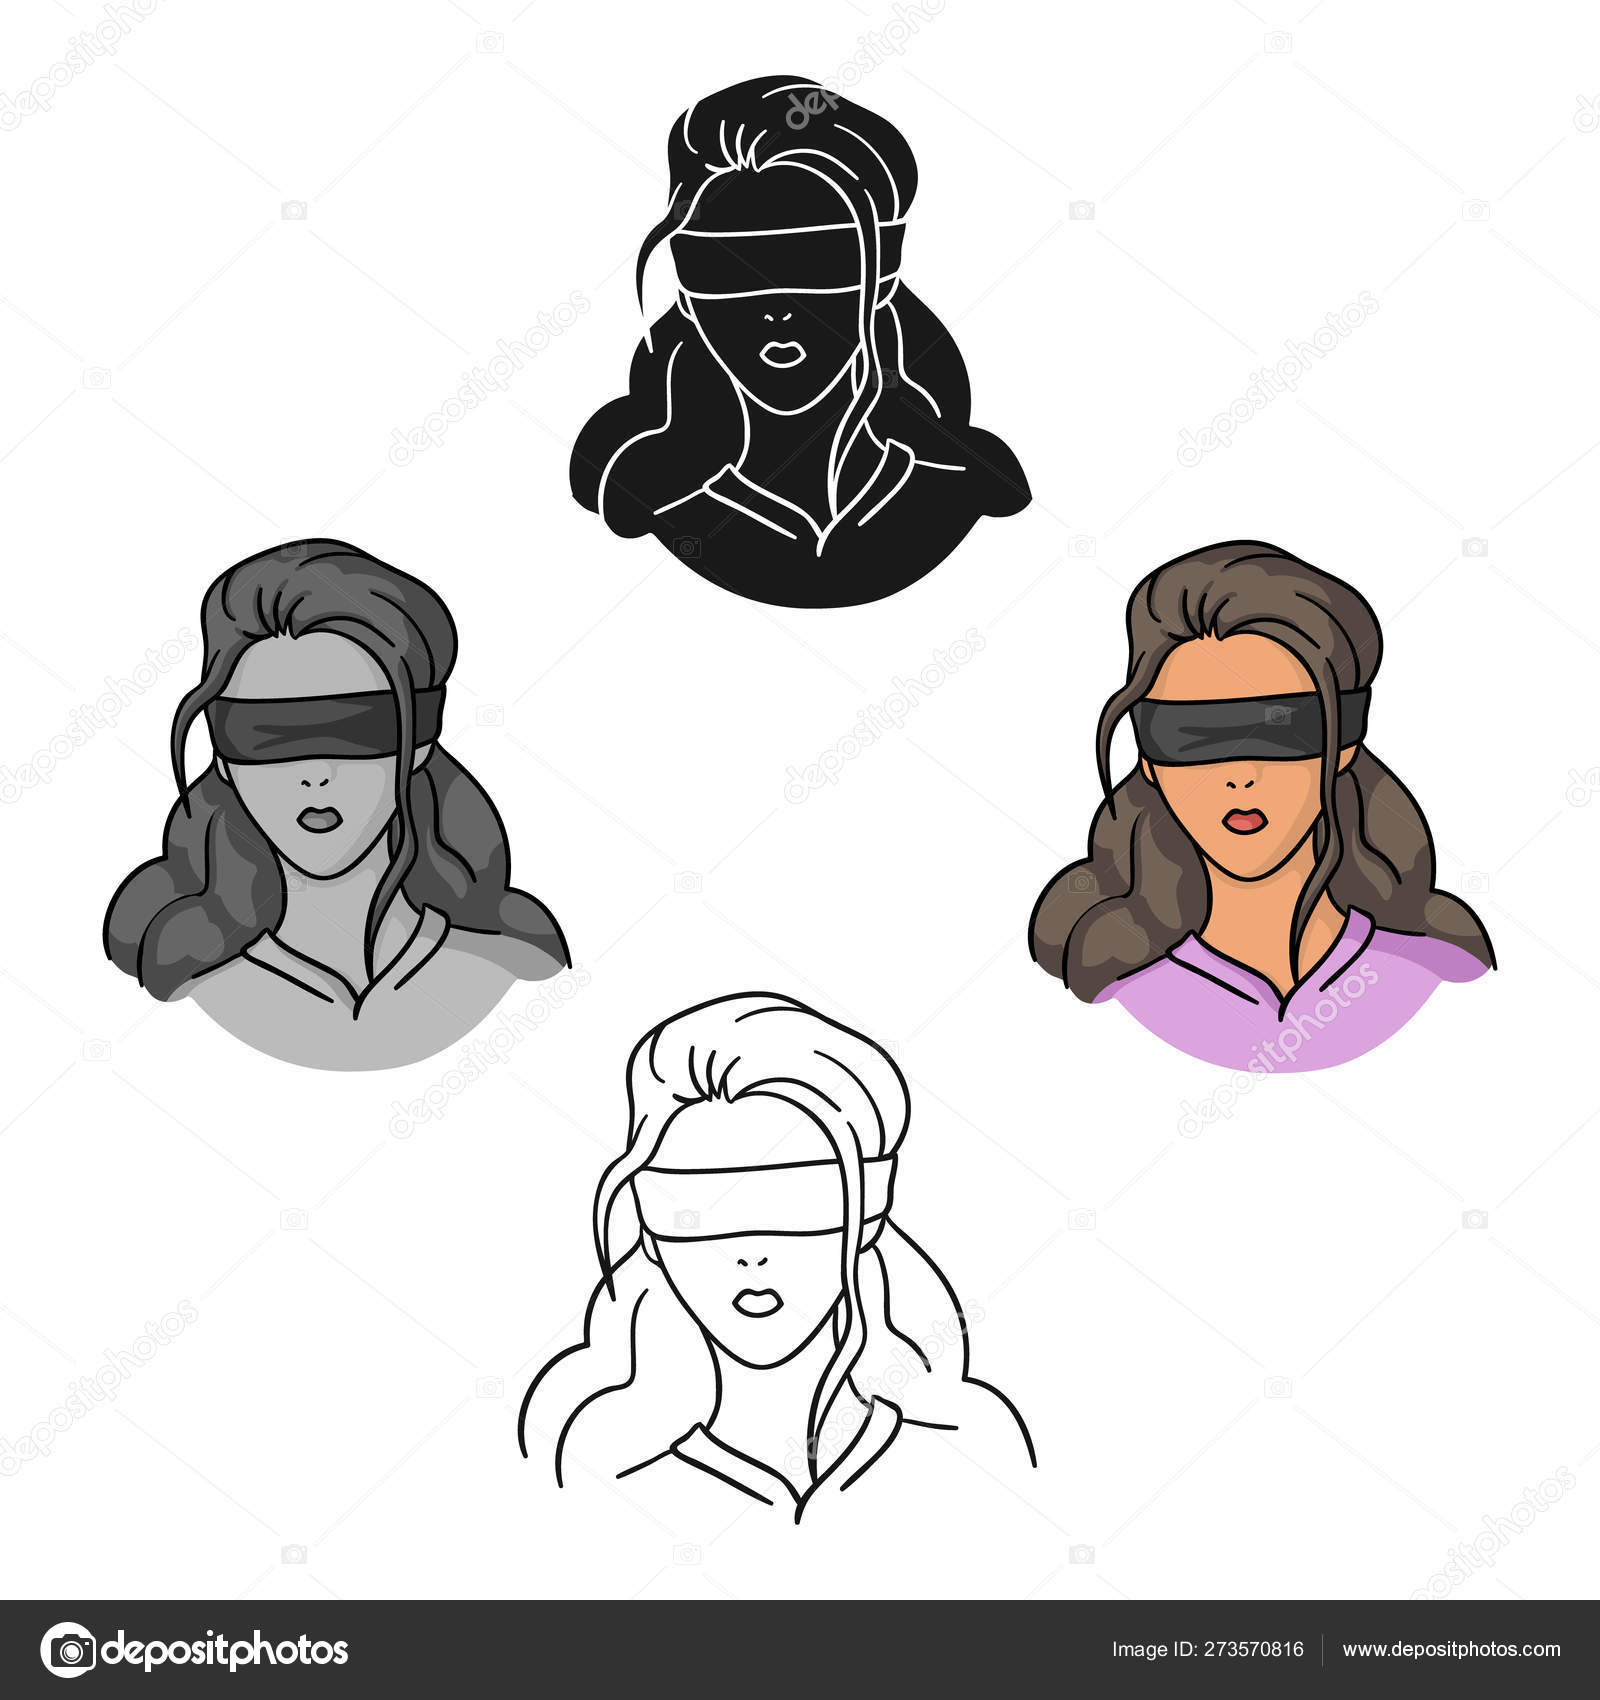 Blindfolds icon in cartoon style isolated on white